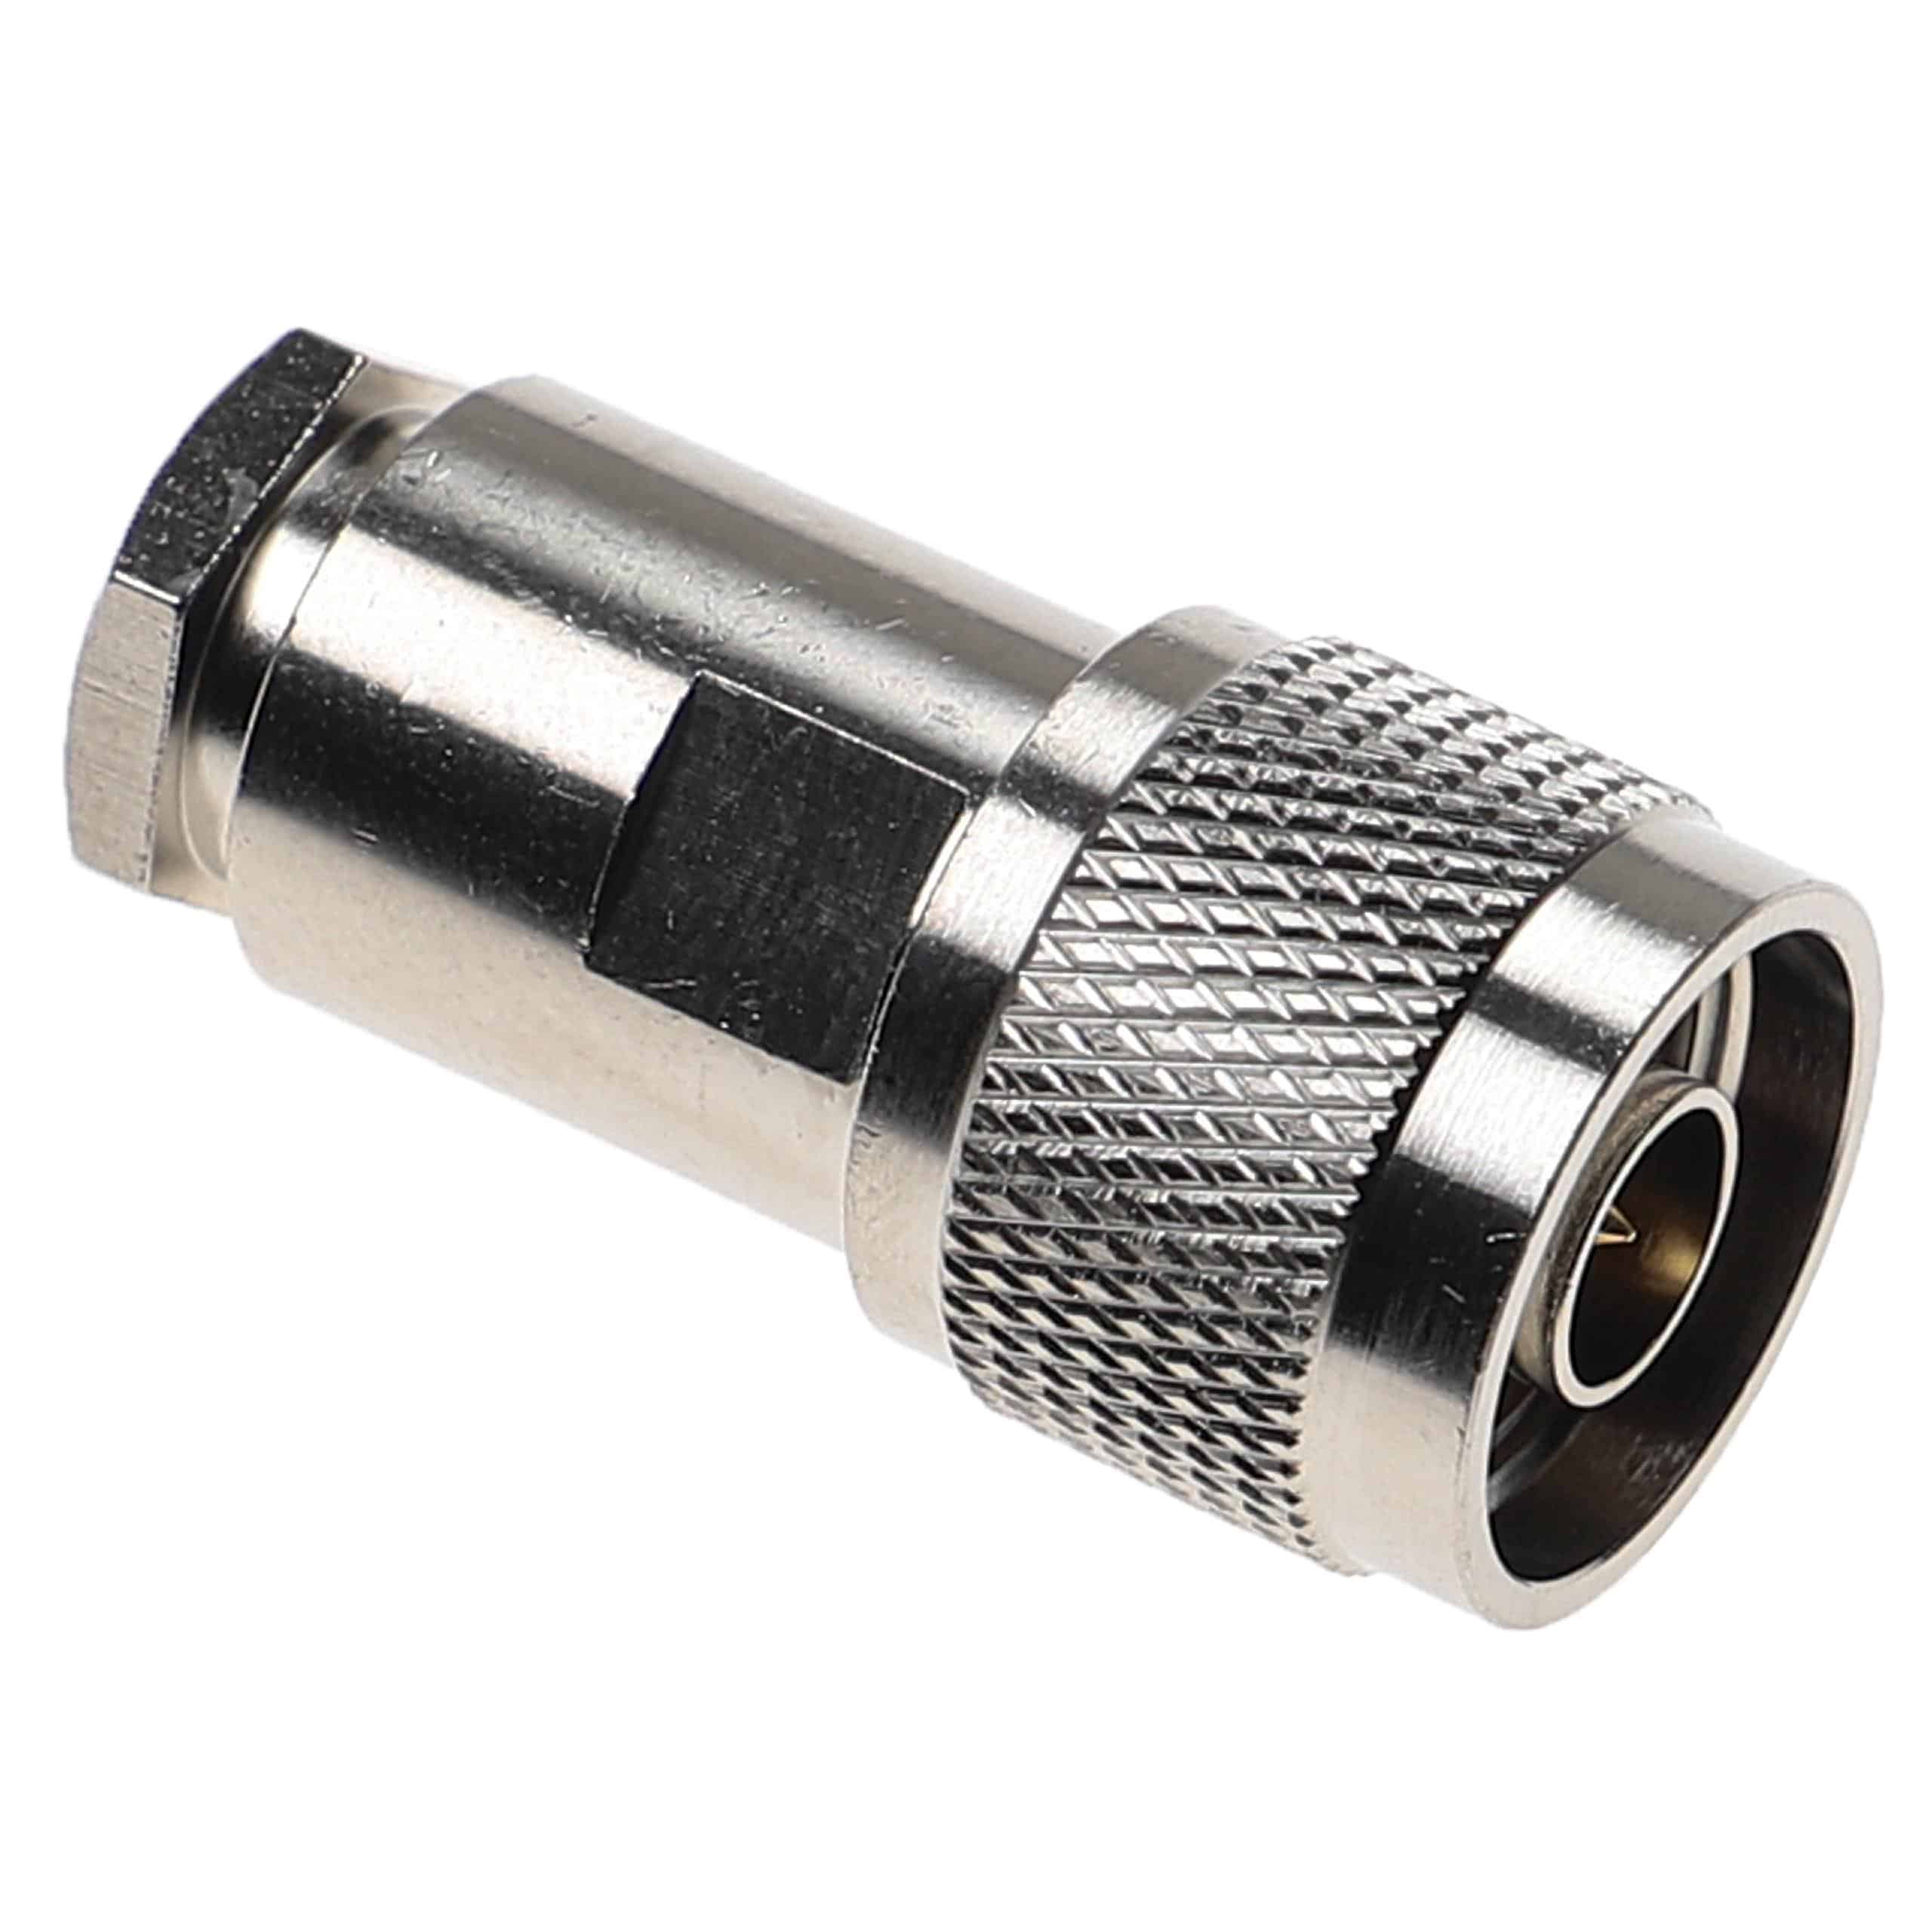 N Connector for Aircell-7, H2007, Ultraflex-7 Coaxial Cable - Coaxial Connector for GPS & WiFi Devices